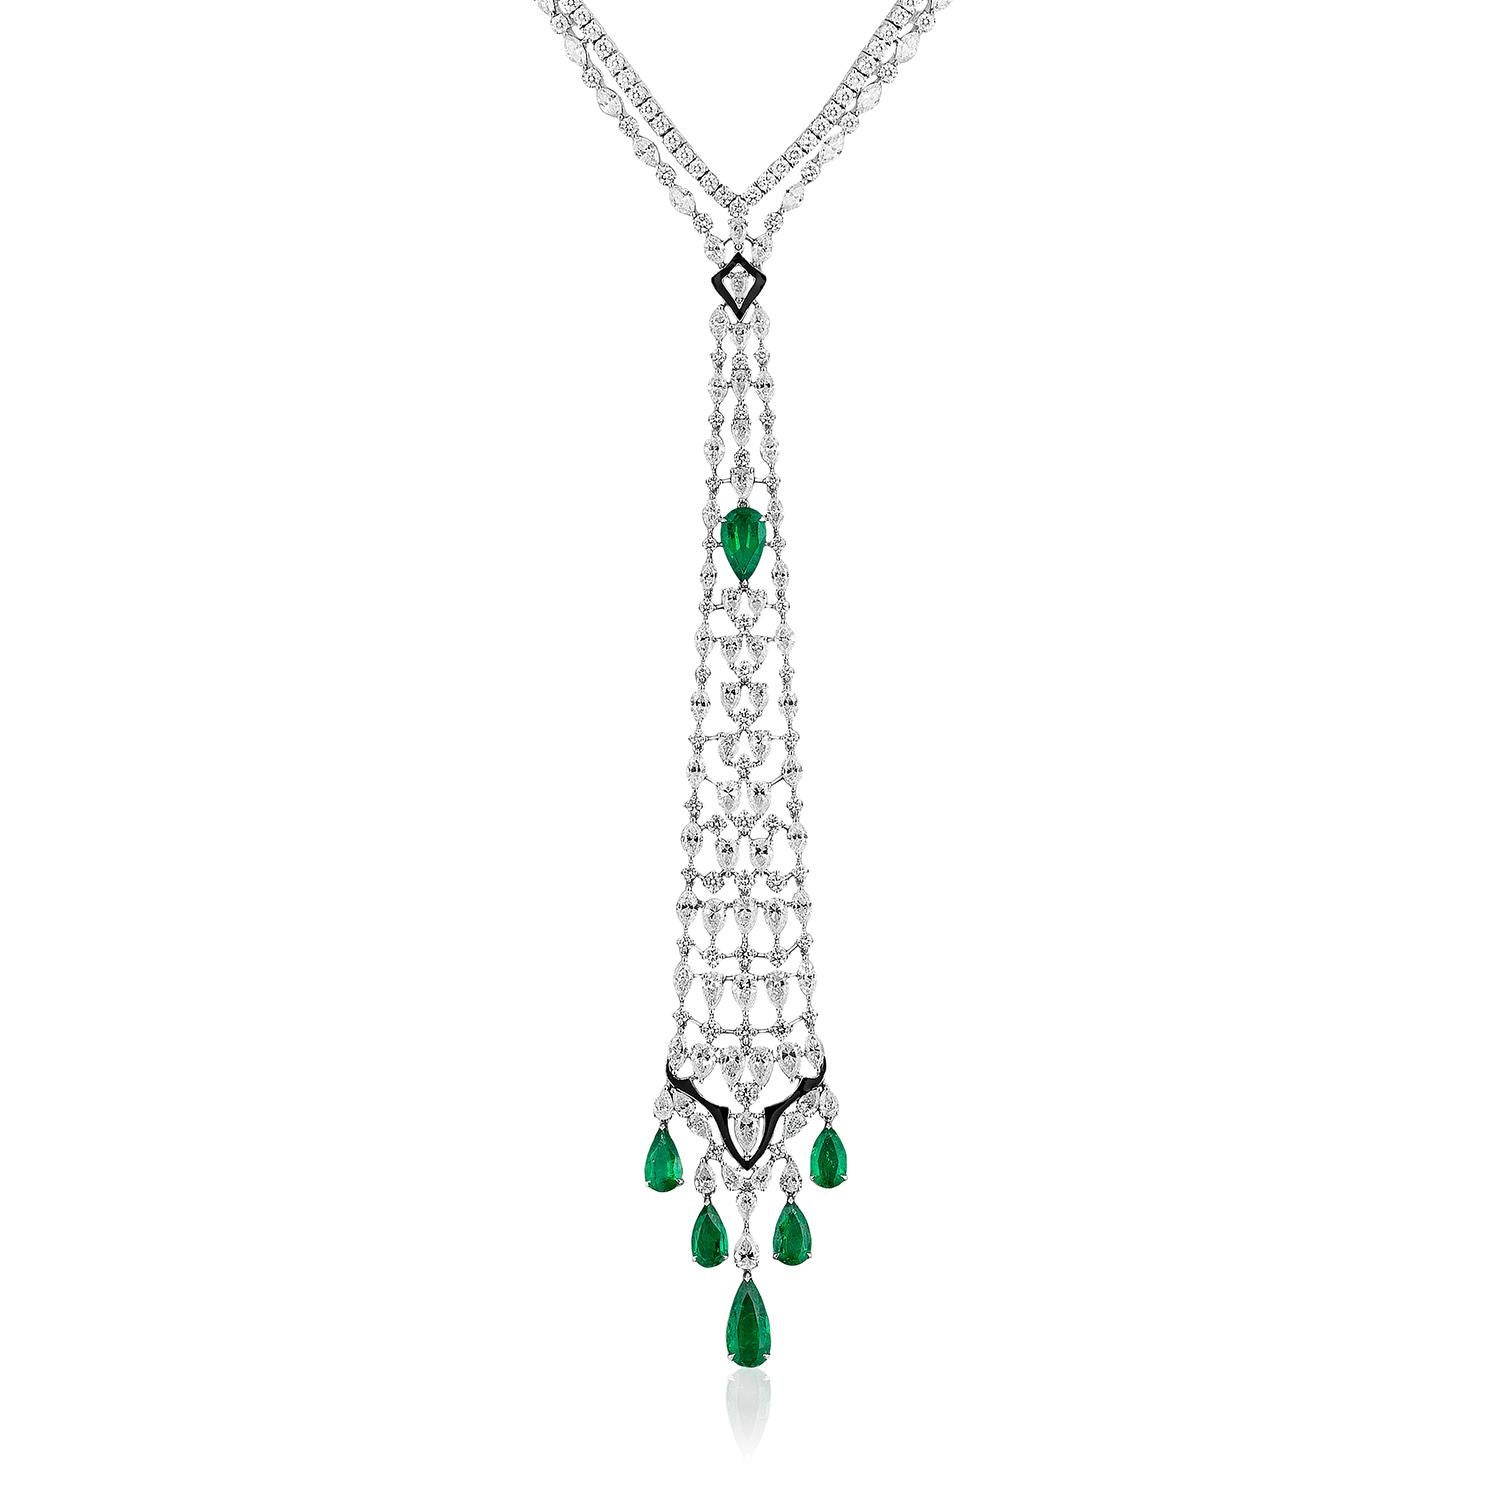 Contemporary Andreoli Emerald Diamond Onyx 18 Karat White Gold Necklace For Sale